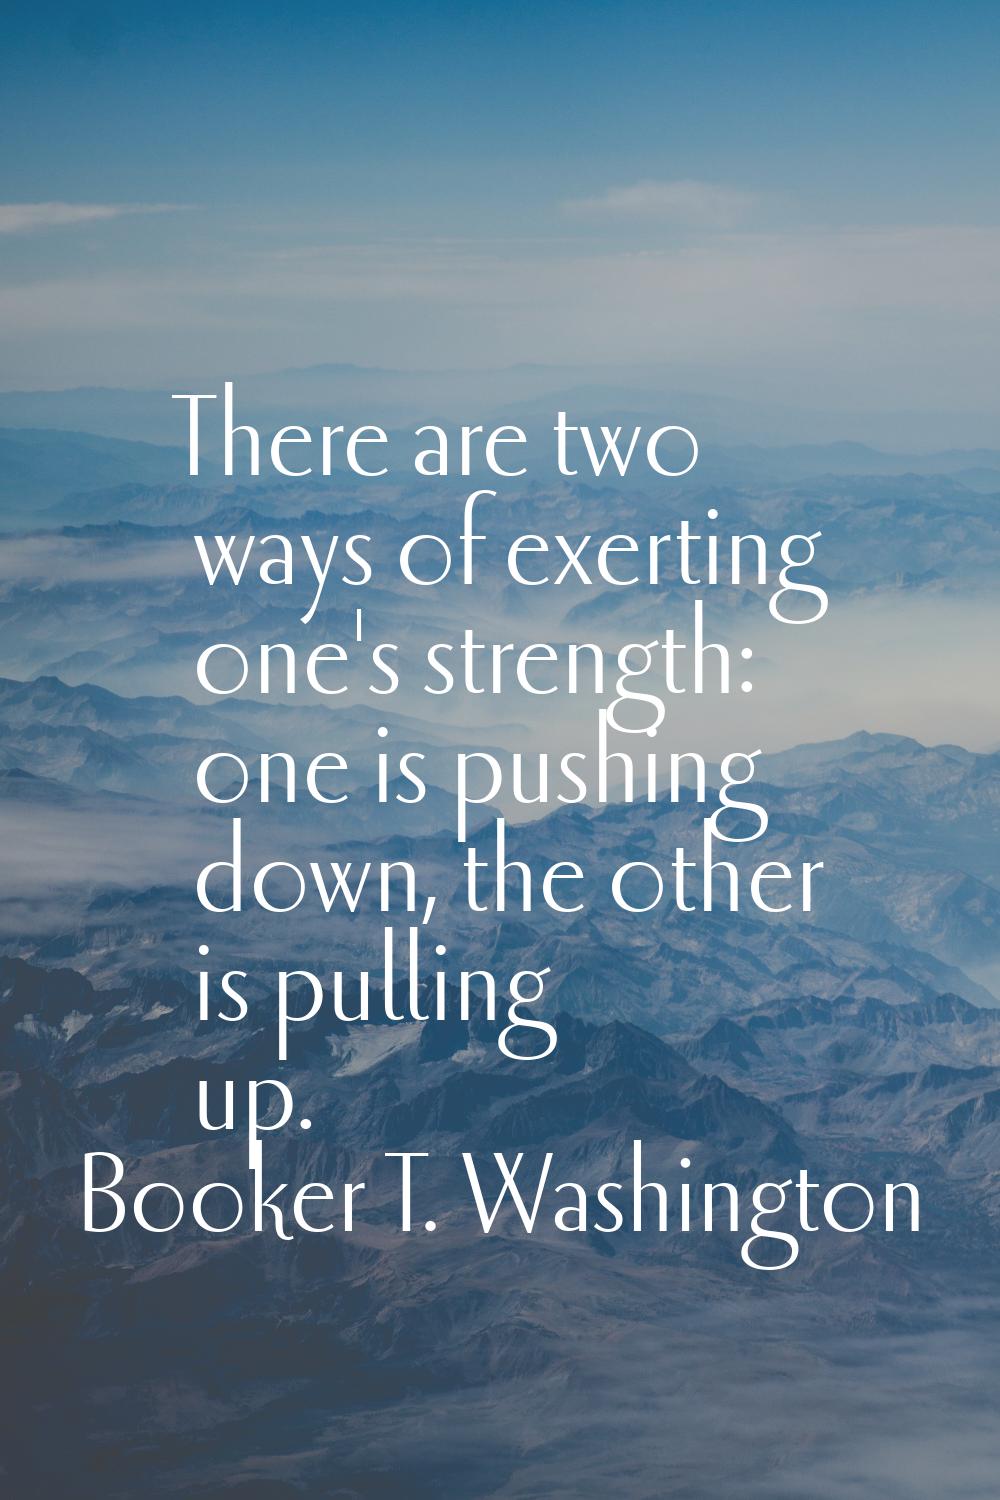 There are two ways of exerting one's strength: one is pushing down, the other is pulling up.